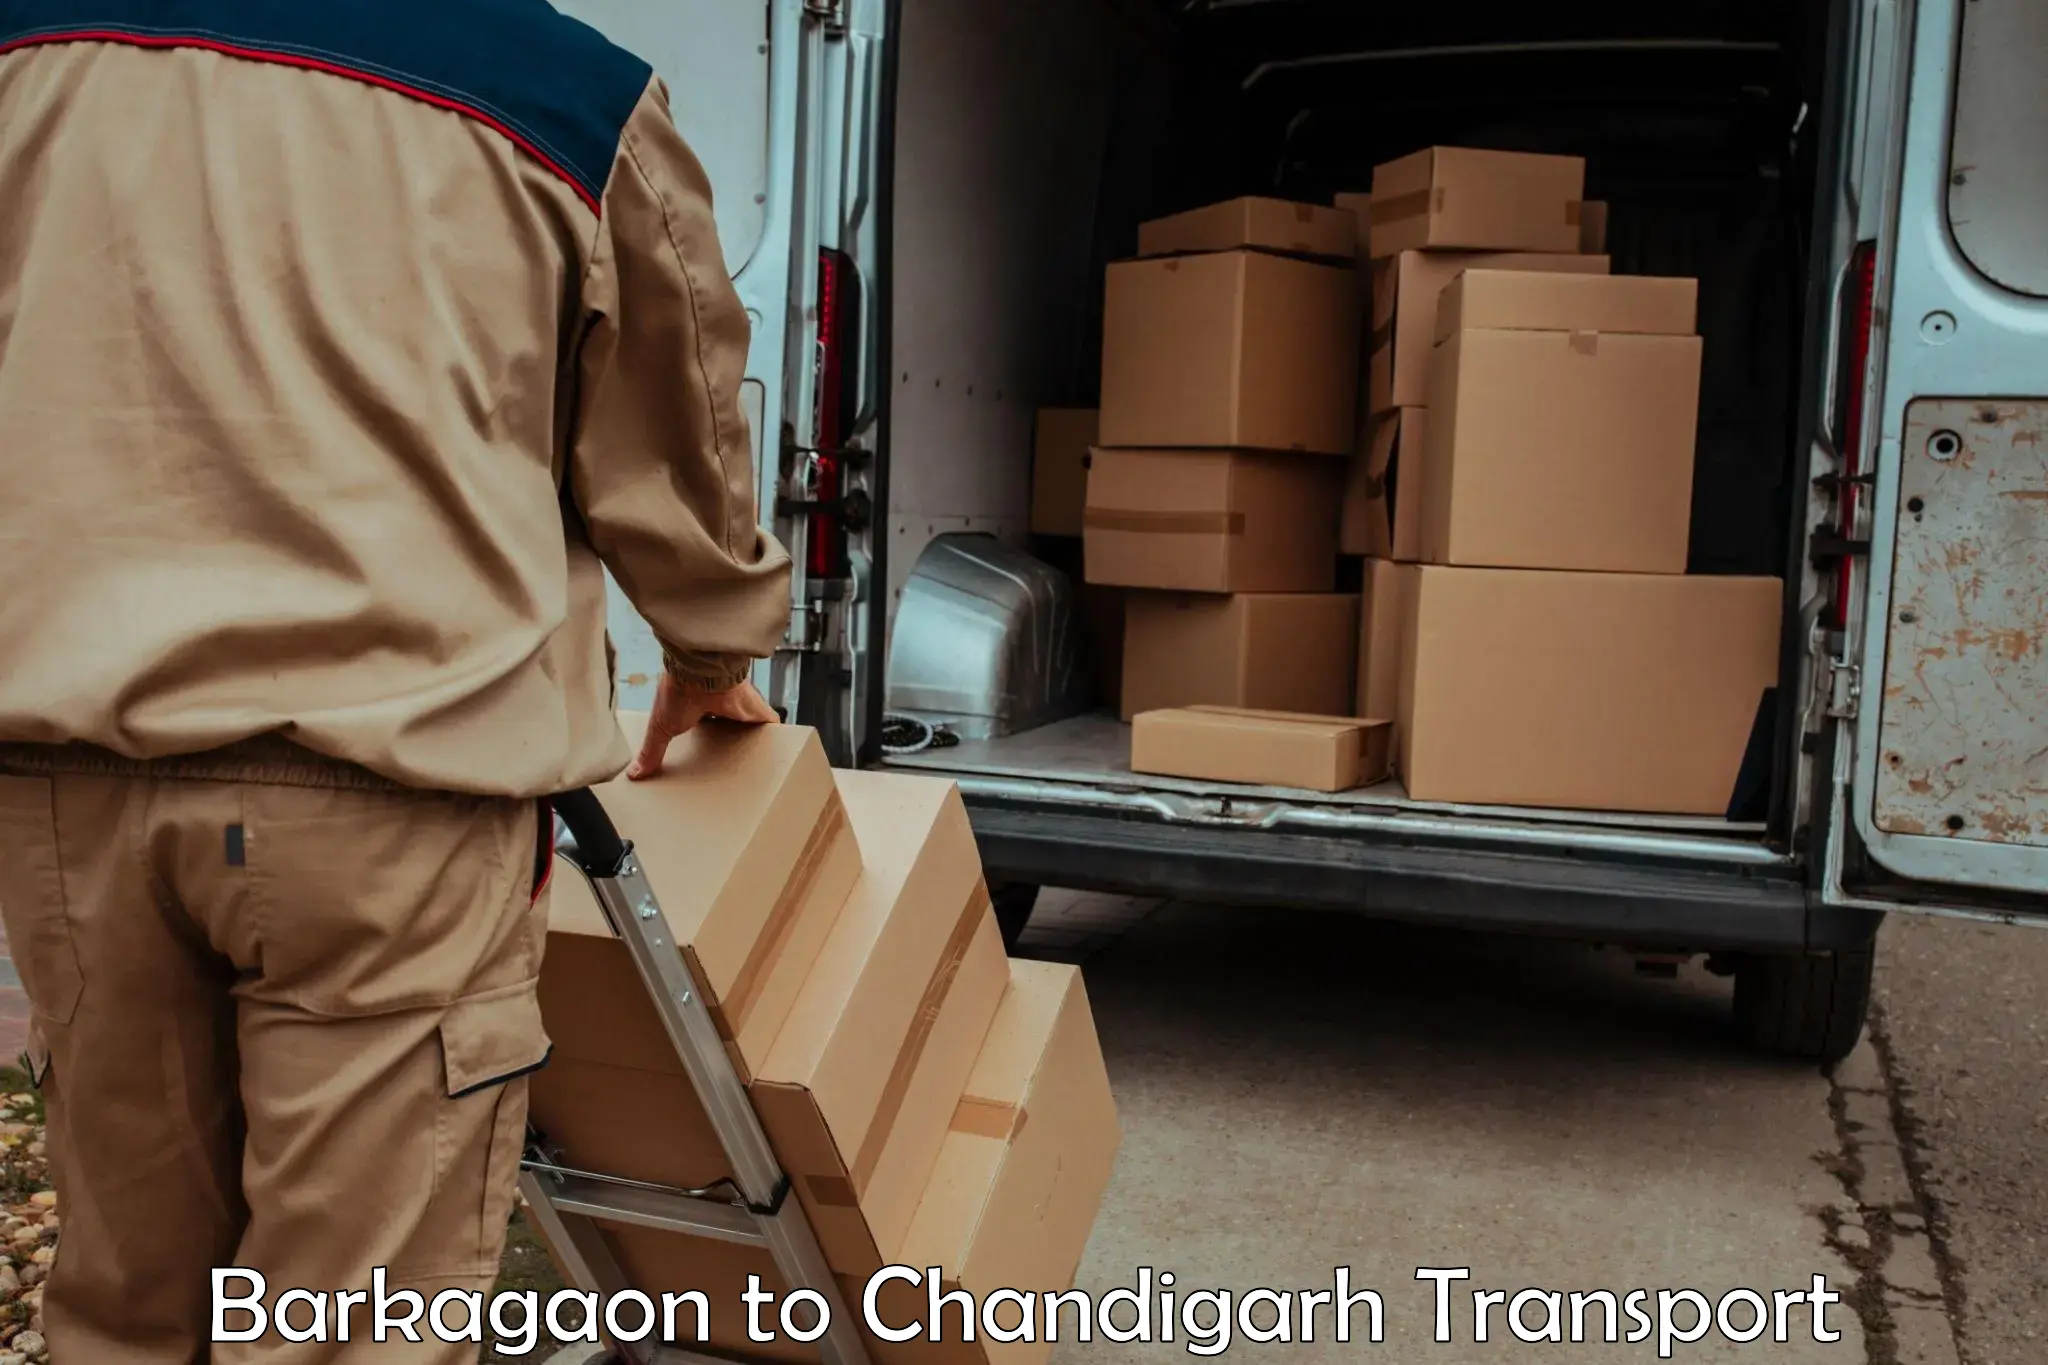 Truck transport companies in India Barkagaon to Chandigarh